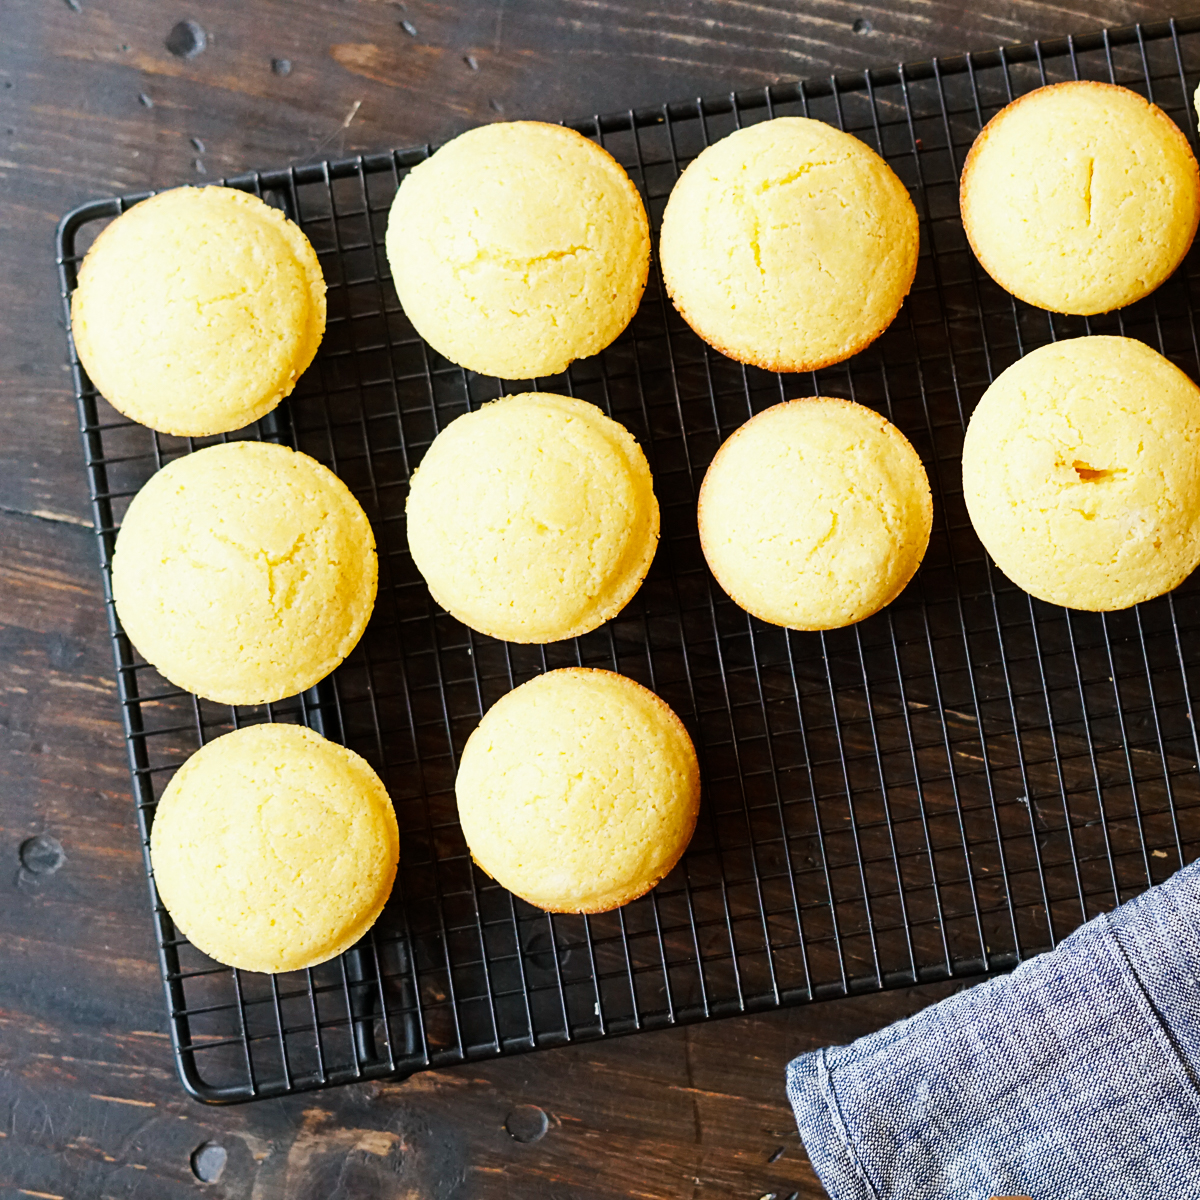 10 Cracker Barrel Cornbread Muffins on a wire rack with a blue potholder